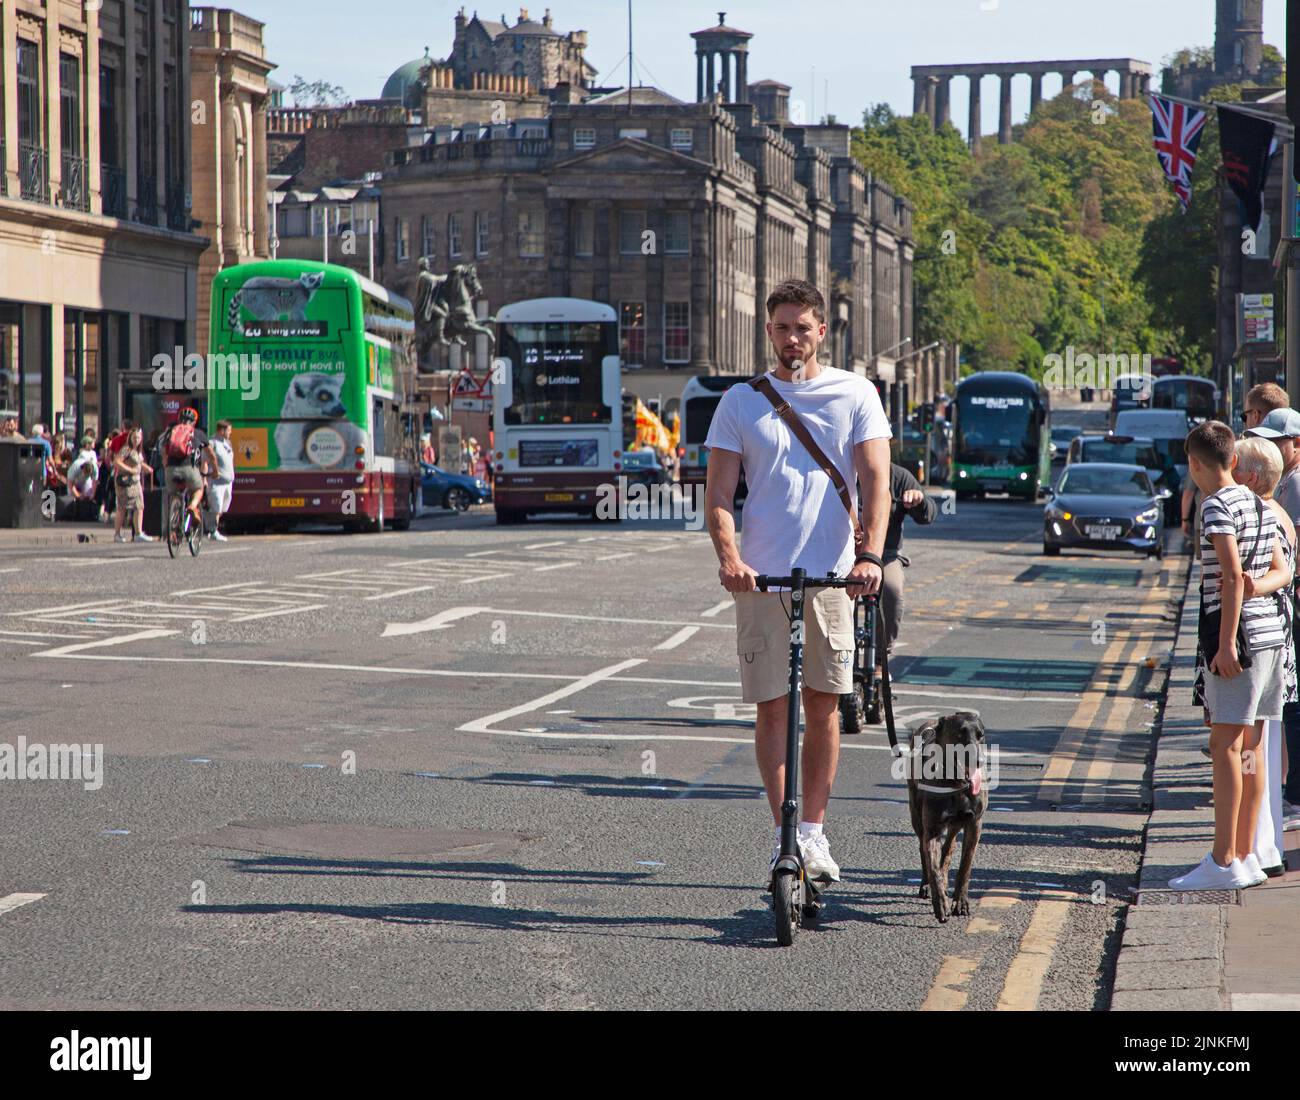 Edinburgh city centre, Scotland, UK. 12th August 2022. Edinburgh busy for the 8th day of Edinburgh Festival Fringe at various venues in the capital city for the end of the first full week. Temperature 21 degrees centigrade for those out and about. Pictured: Novel way to take a dog for a walk using an electric scooter on the road in Princes Street. Credit: Scottishcreative/alamy live news. Stock Photo